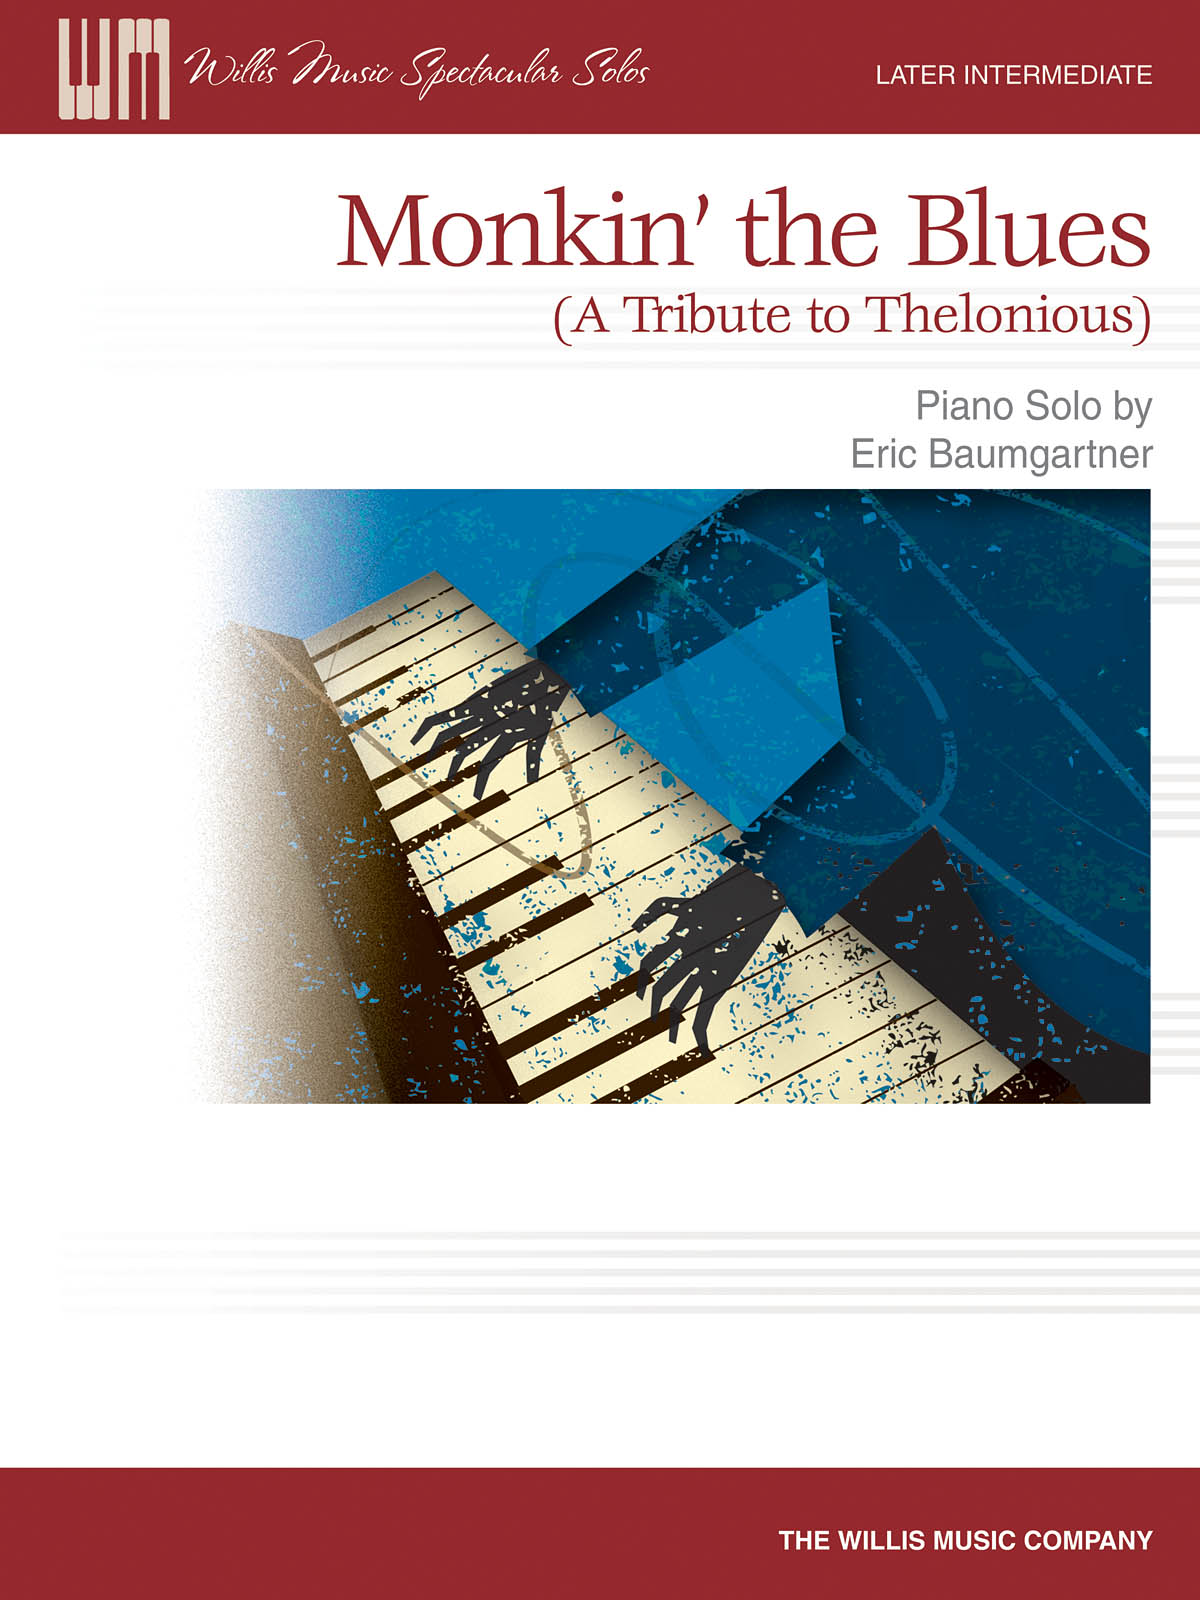 Monkin' the Blues - Later Intermediate to Advanced Level